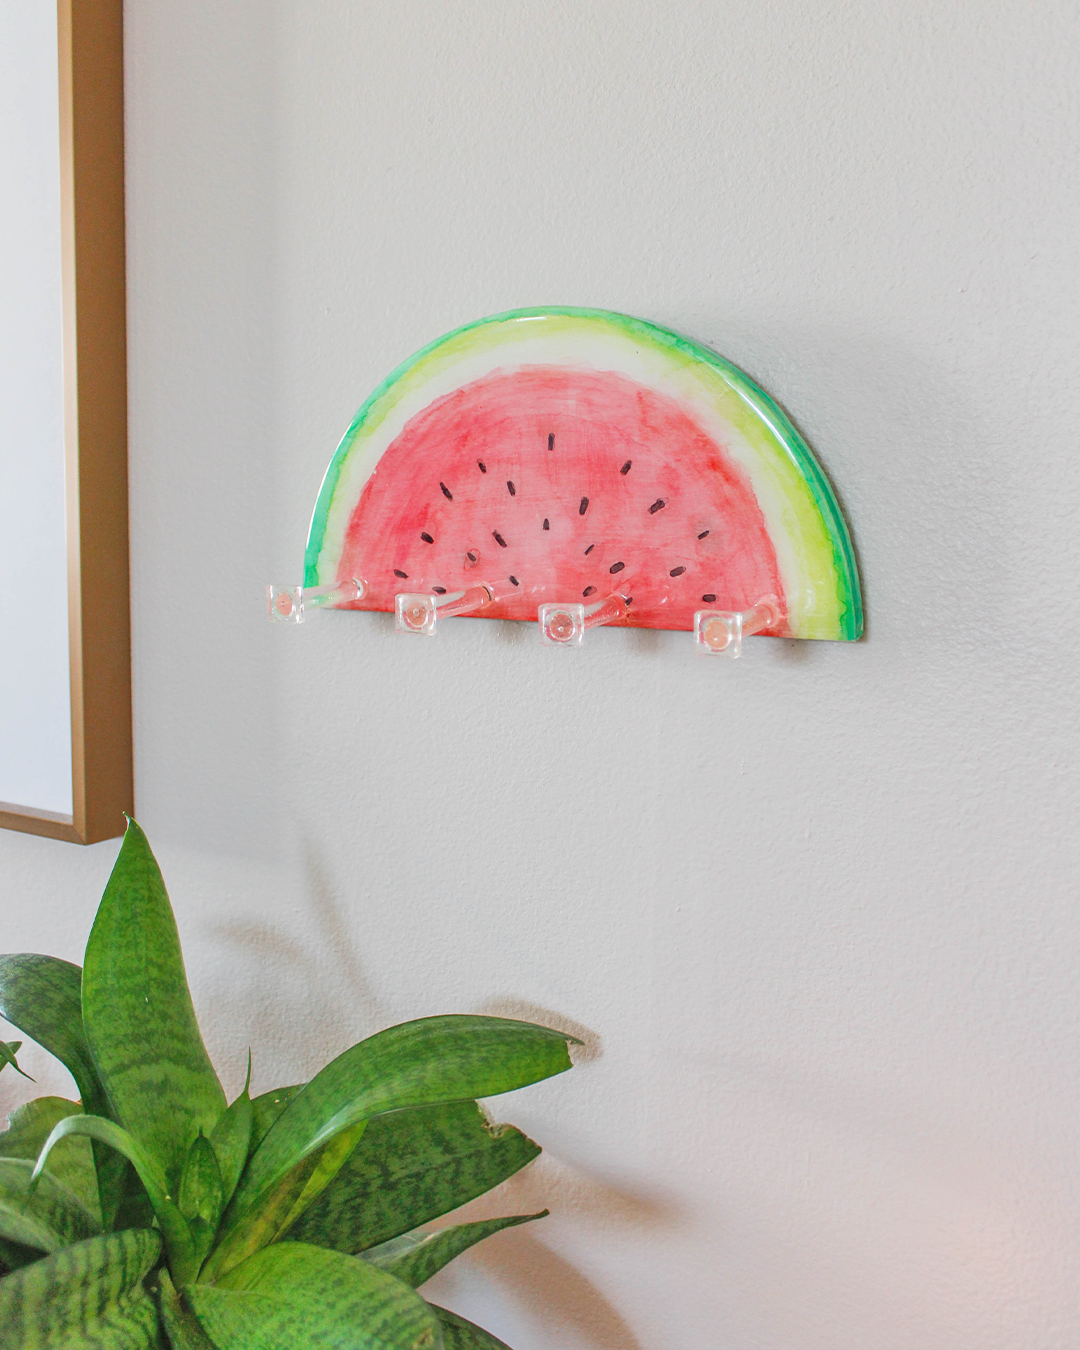 One-of-a-kind watermelon slice key holder, demonstrating its use for hanging jewelry, leashes, and small accessories.